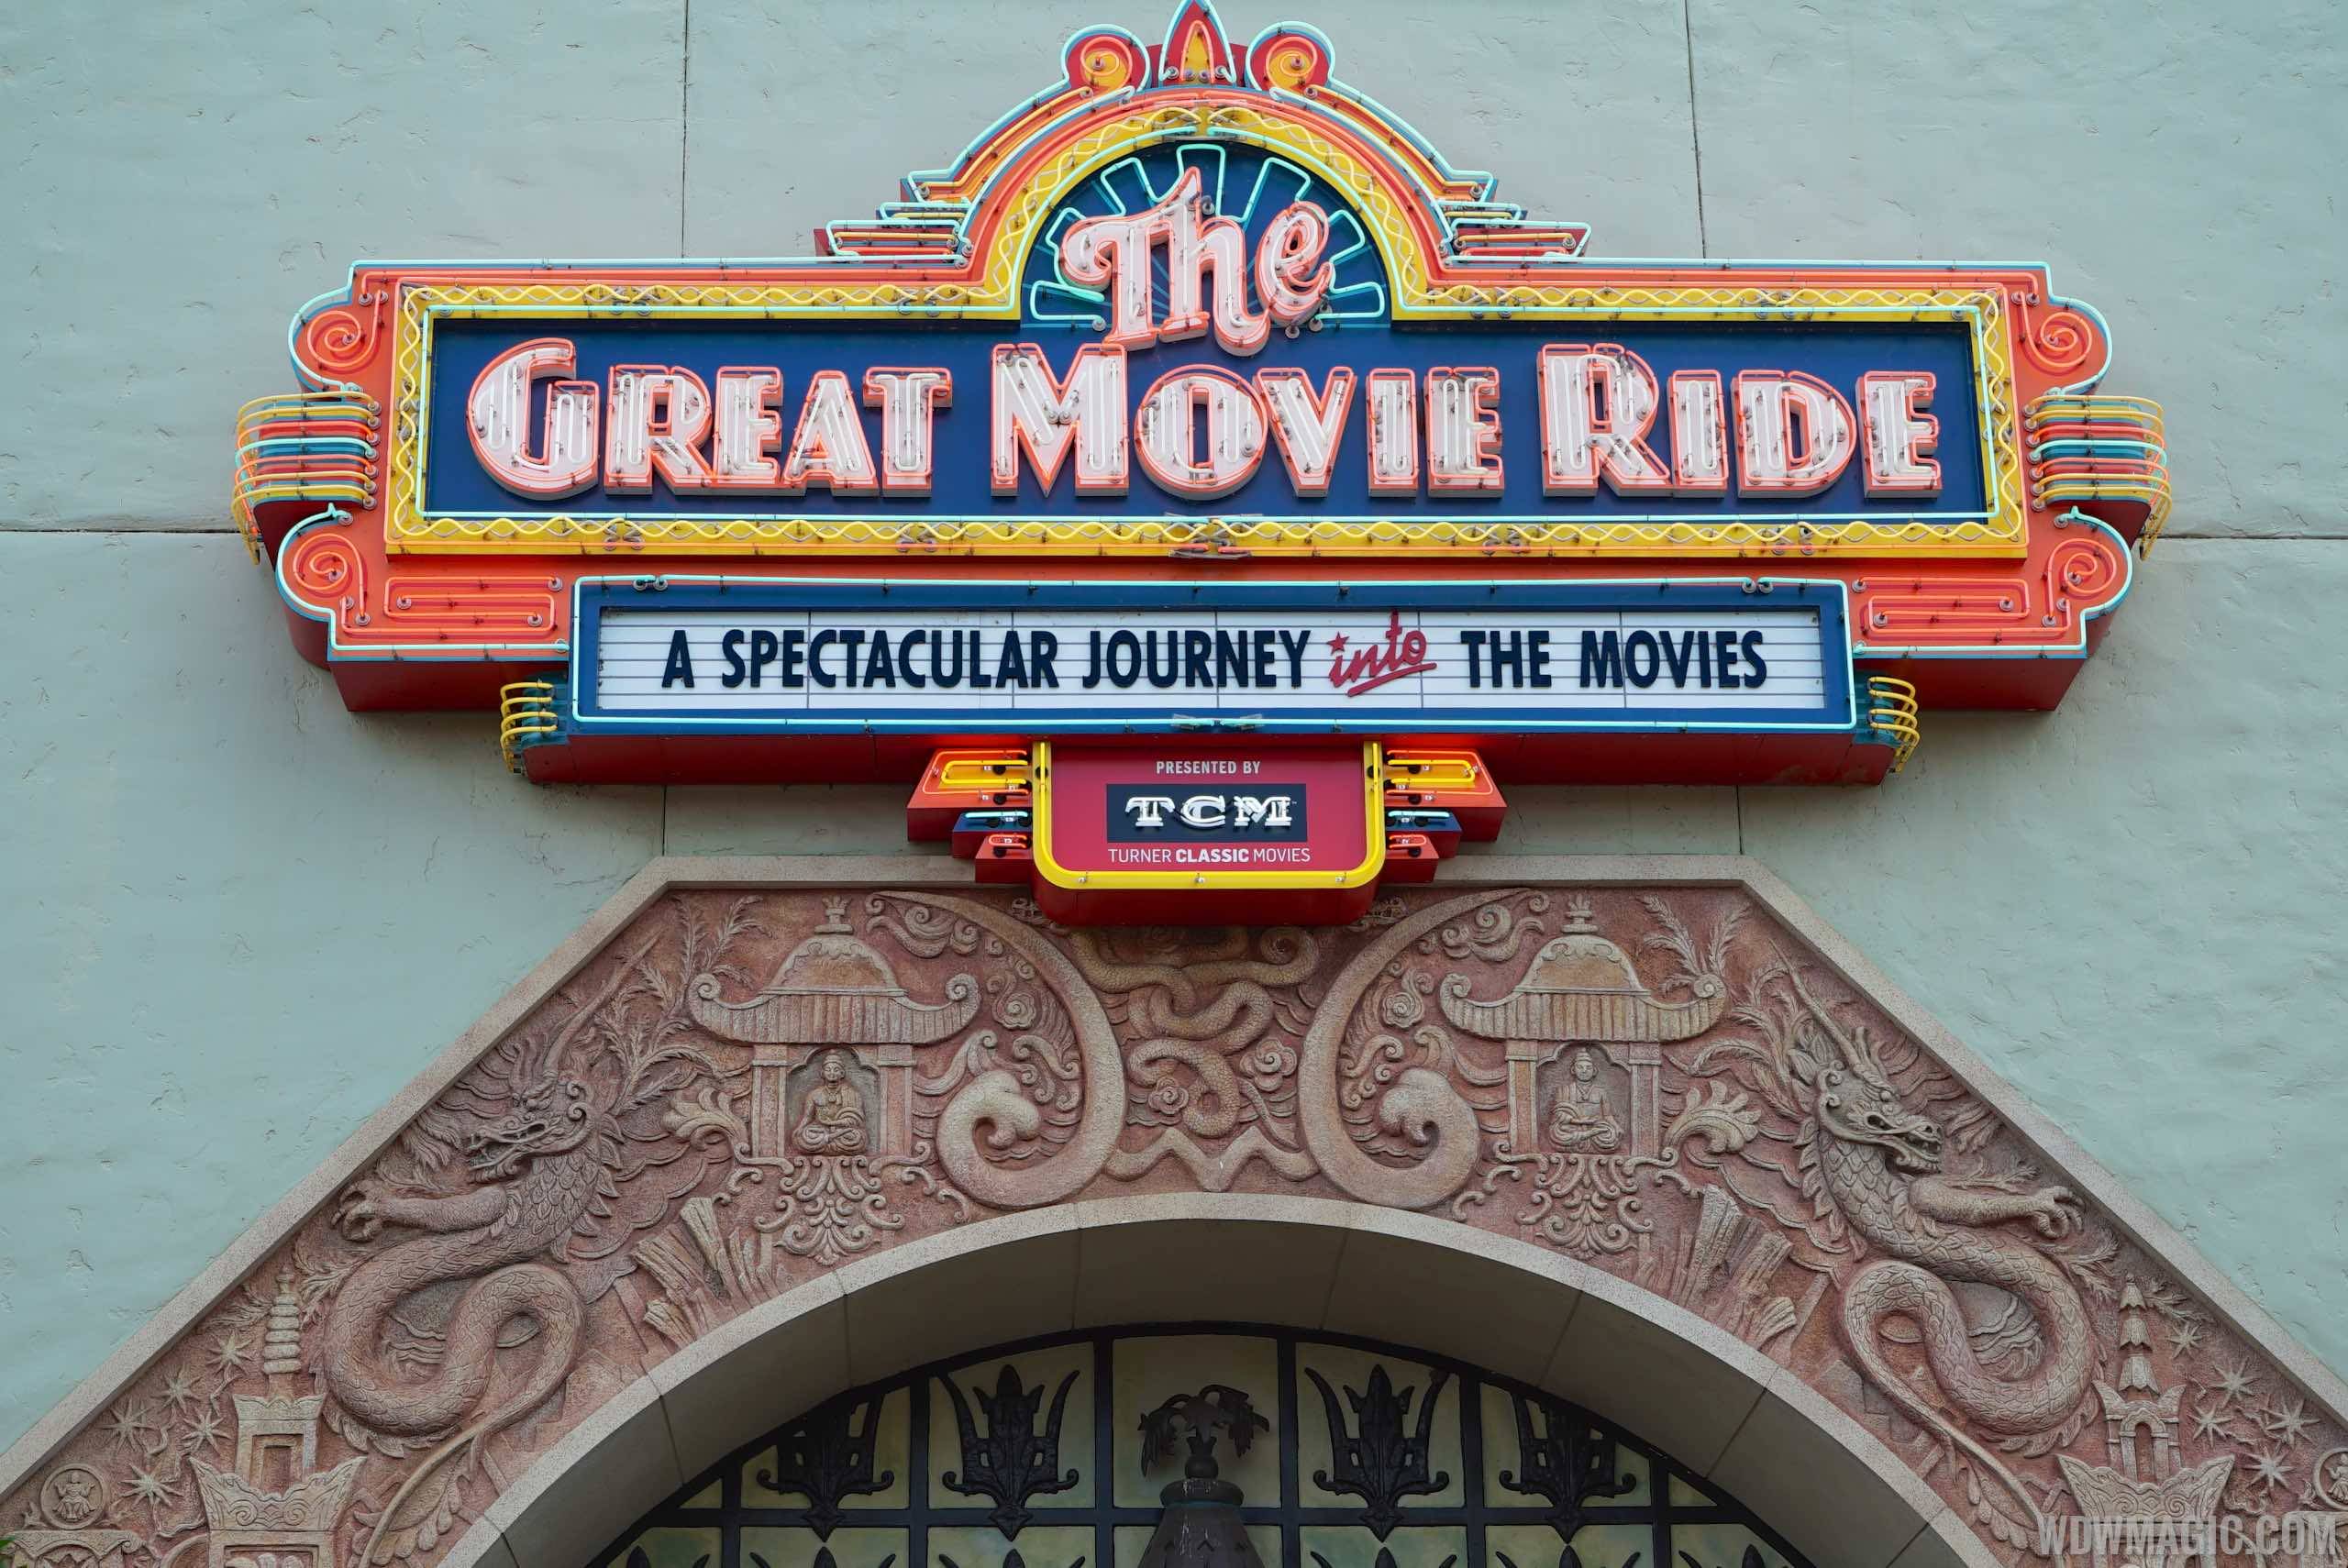 PHOTOS and VIDEO - New Turner Classic Movie channel updates debut at The Great Movie Ride